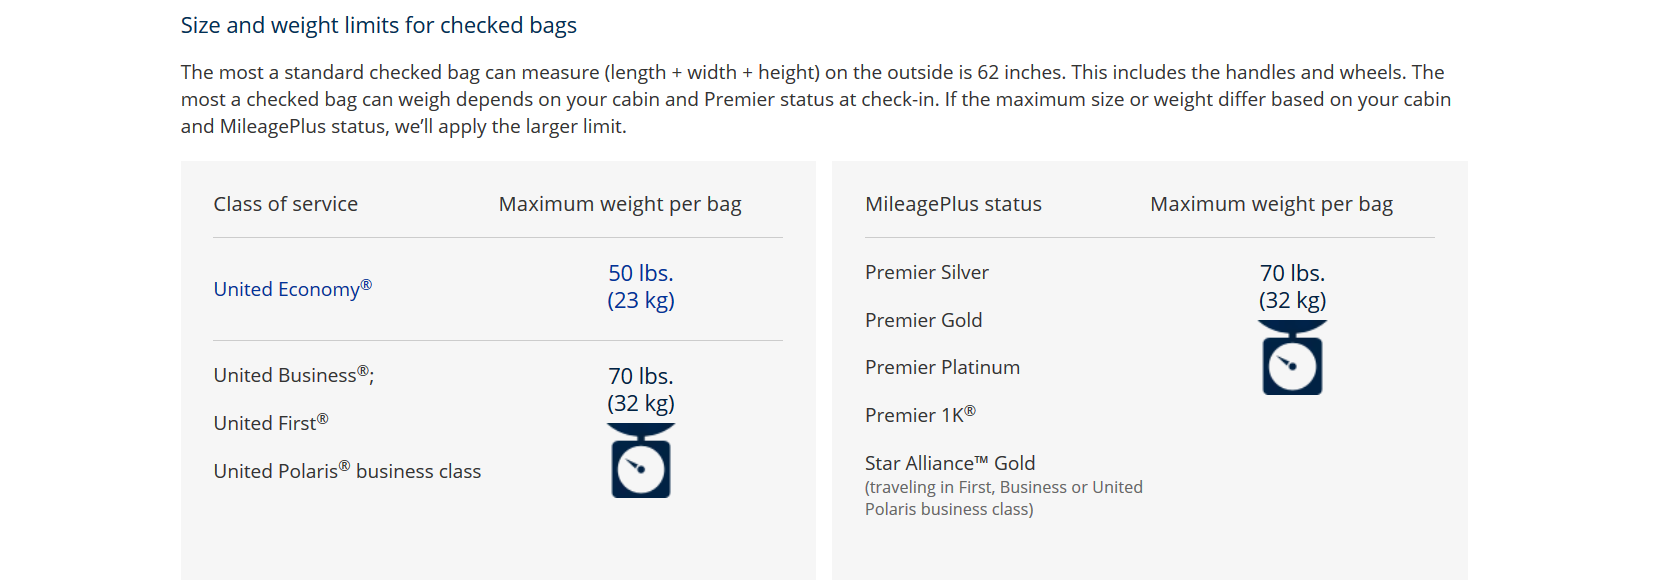 How Much Can A Handbag Weigh On United Airlines?